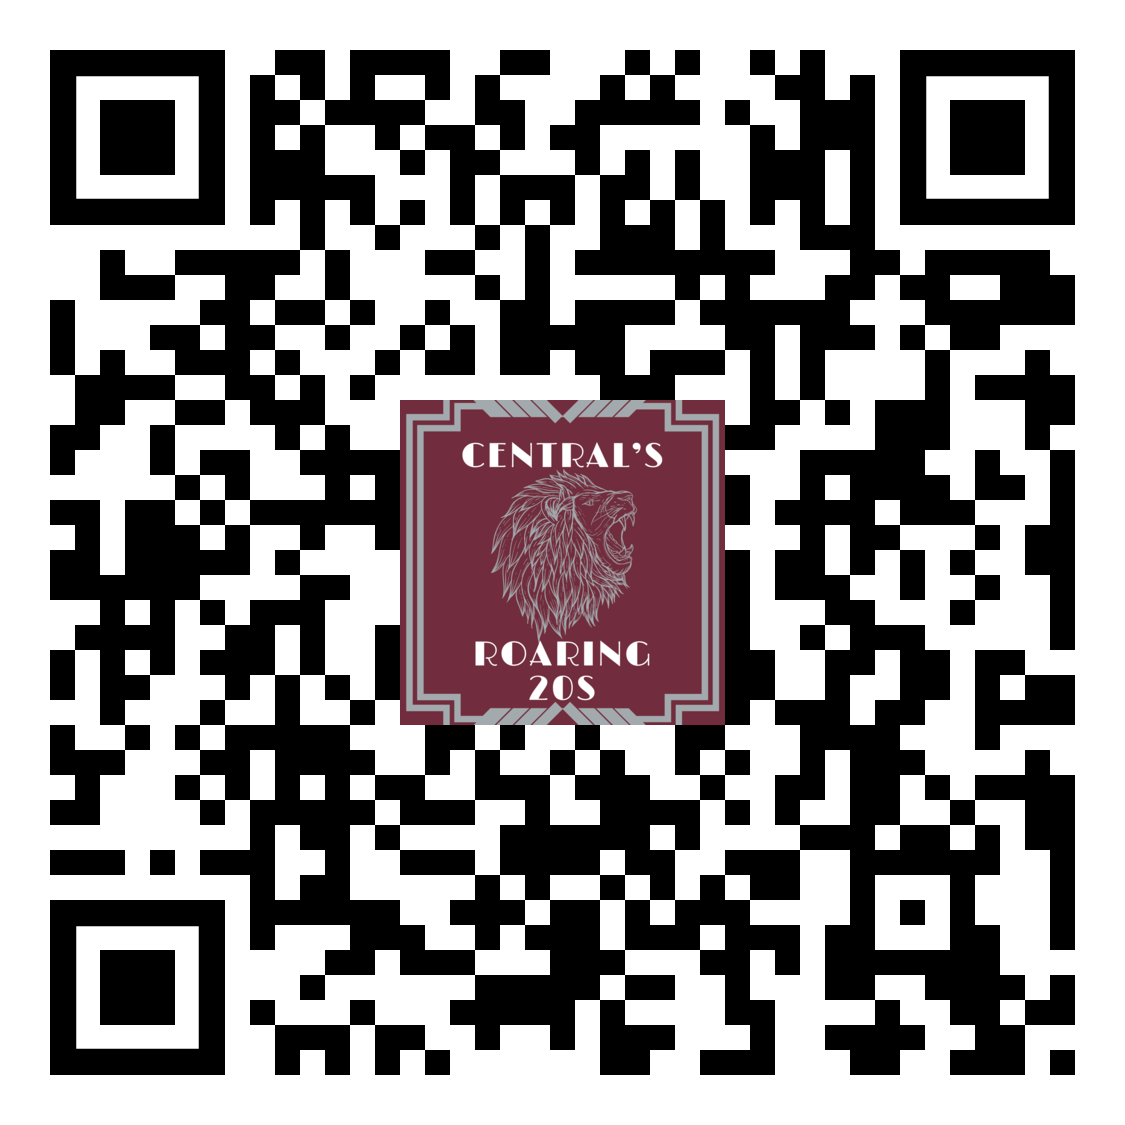 Follow the QR code to purchase tickets via Go Fan